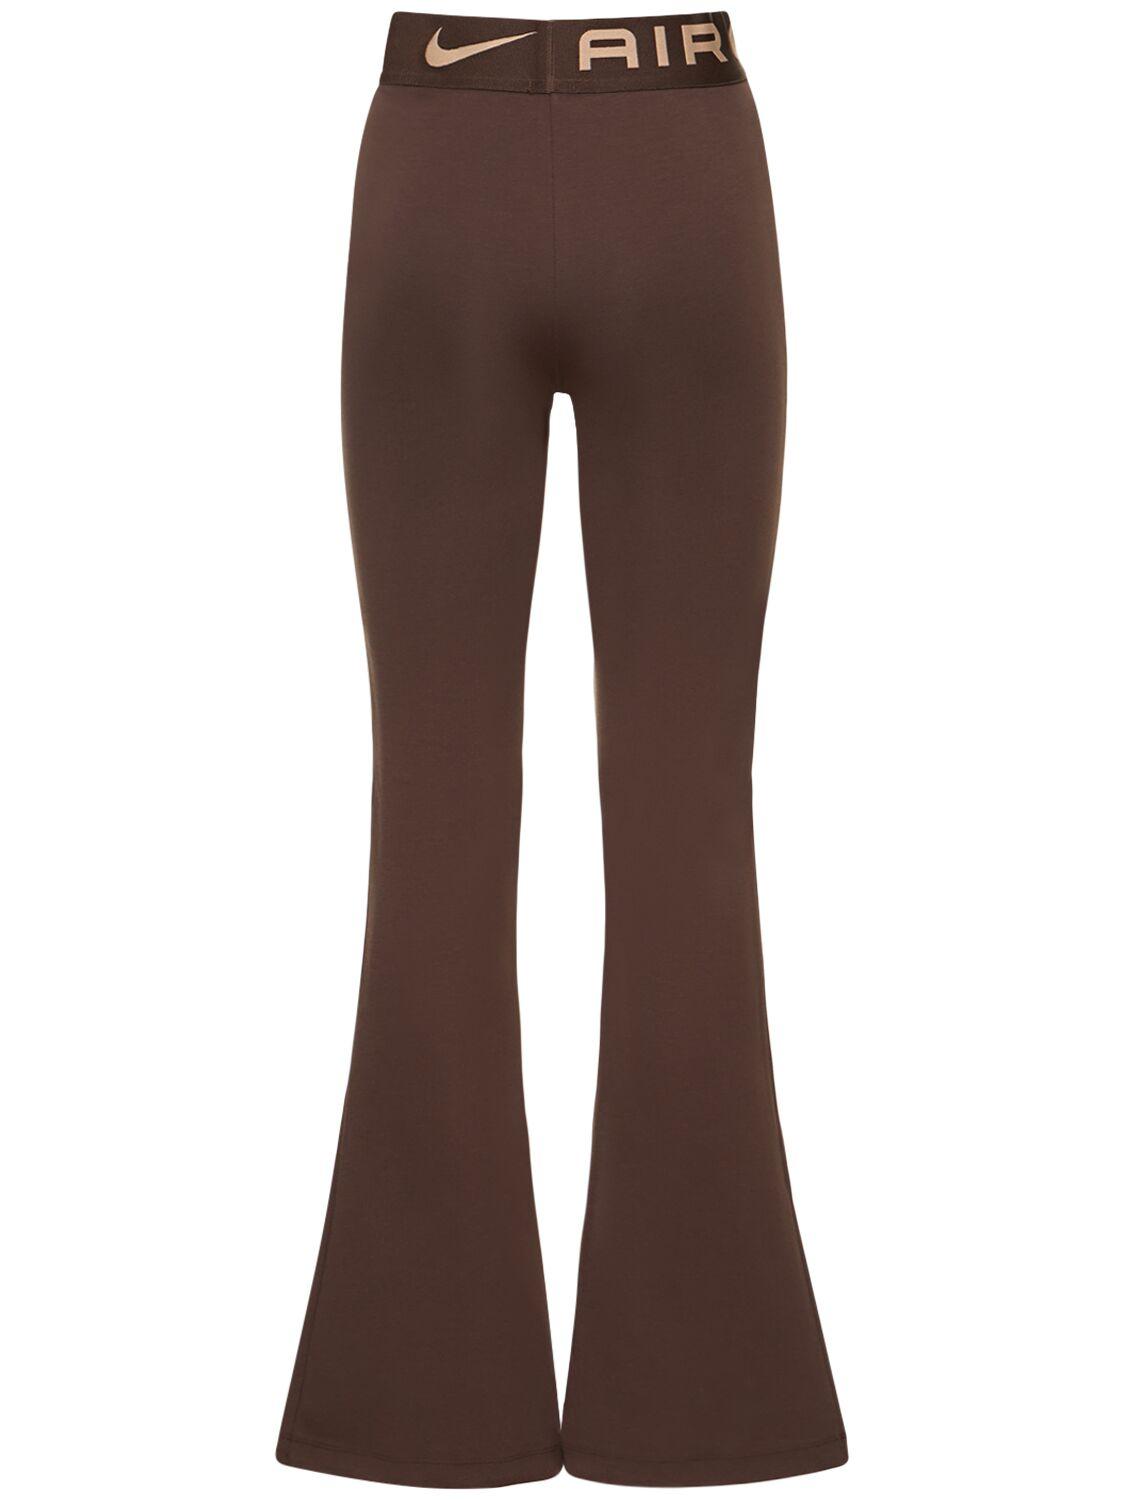 Nike Nsw Air High Rise Tights in Brown